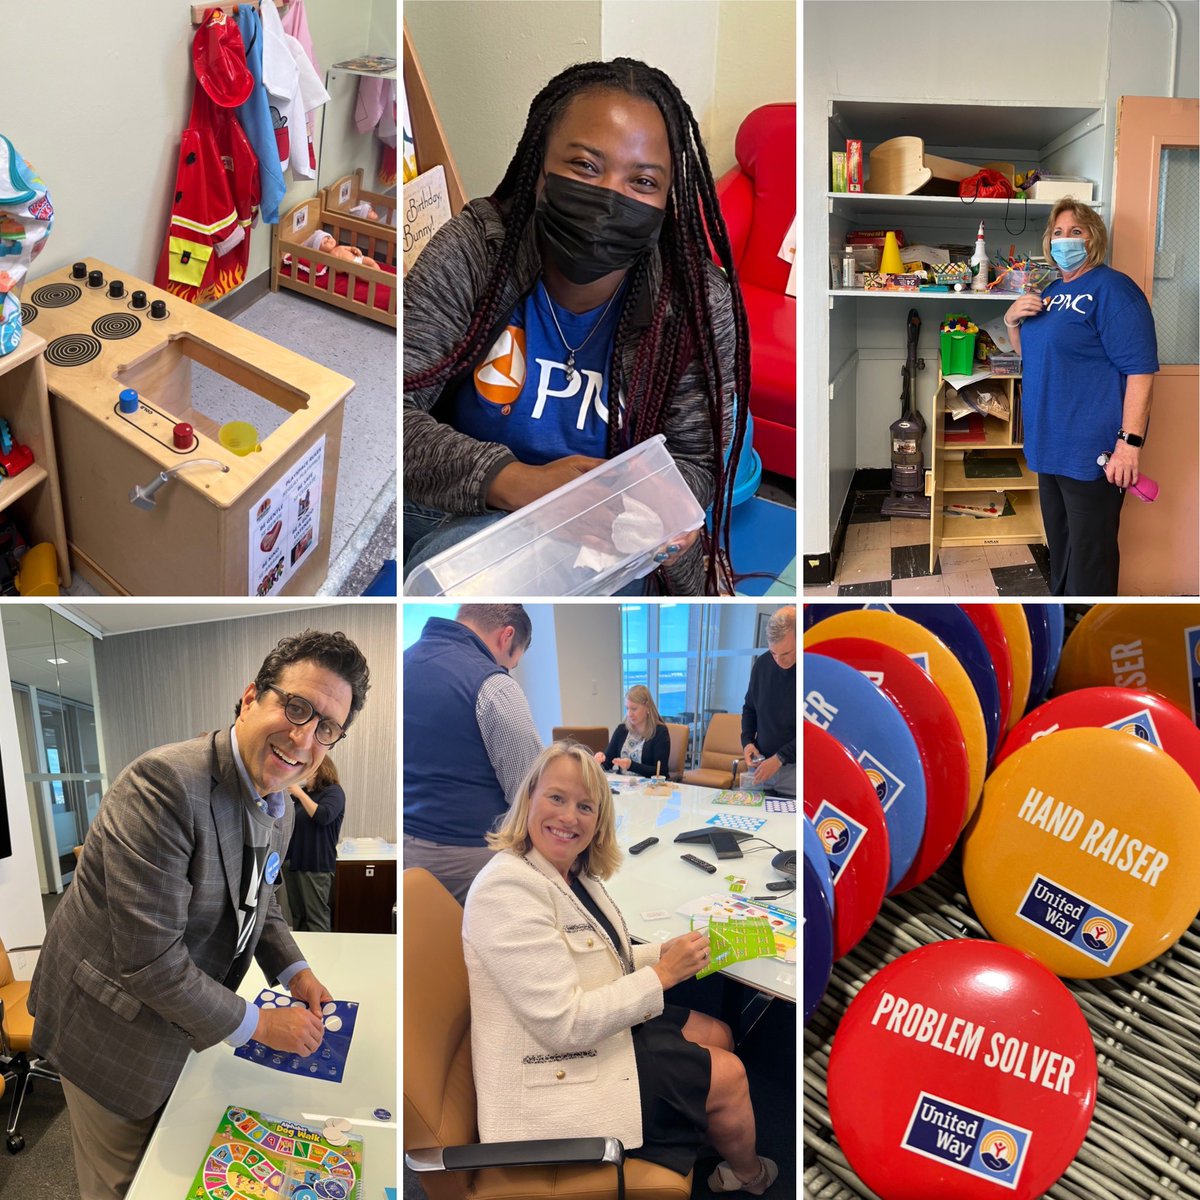 Grateful for the support of the problem solvers and hand raisers over at @PNCBank! Your work expanding access to early childhood programming is invaluable.💙 